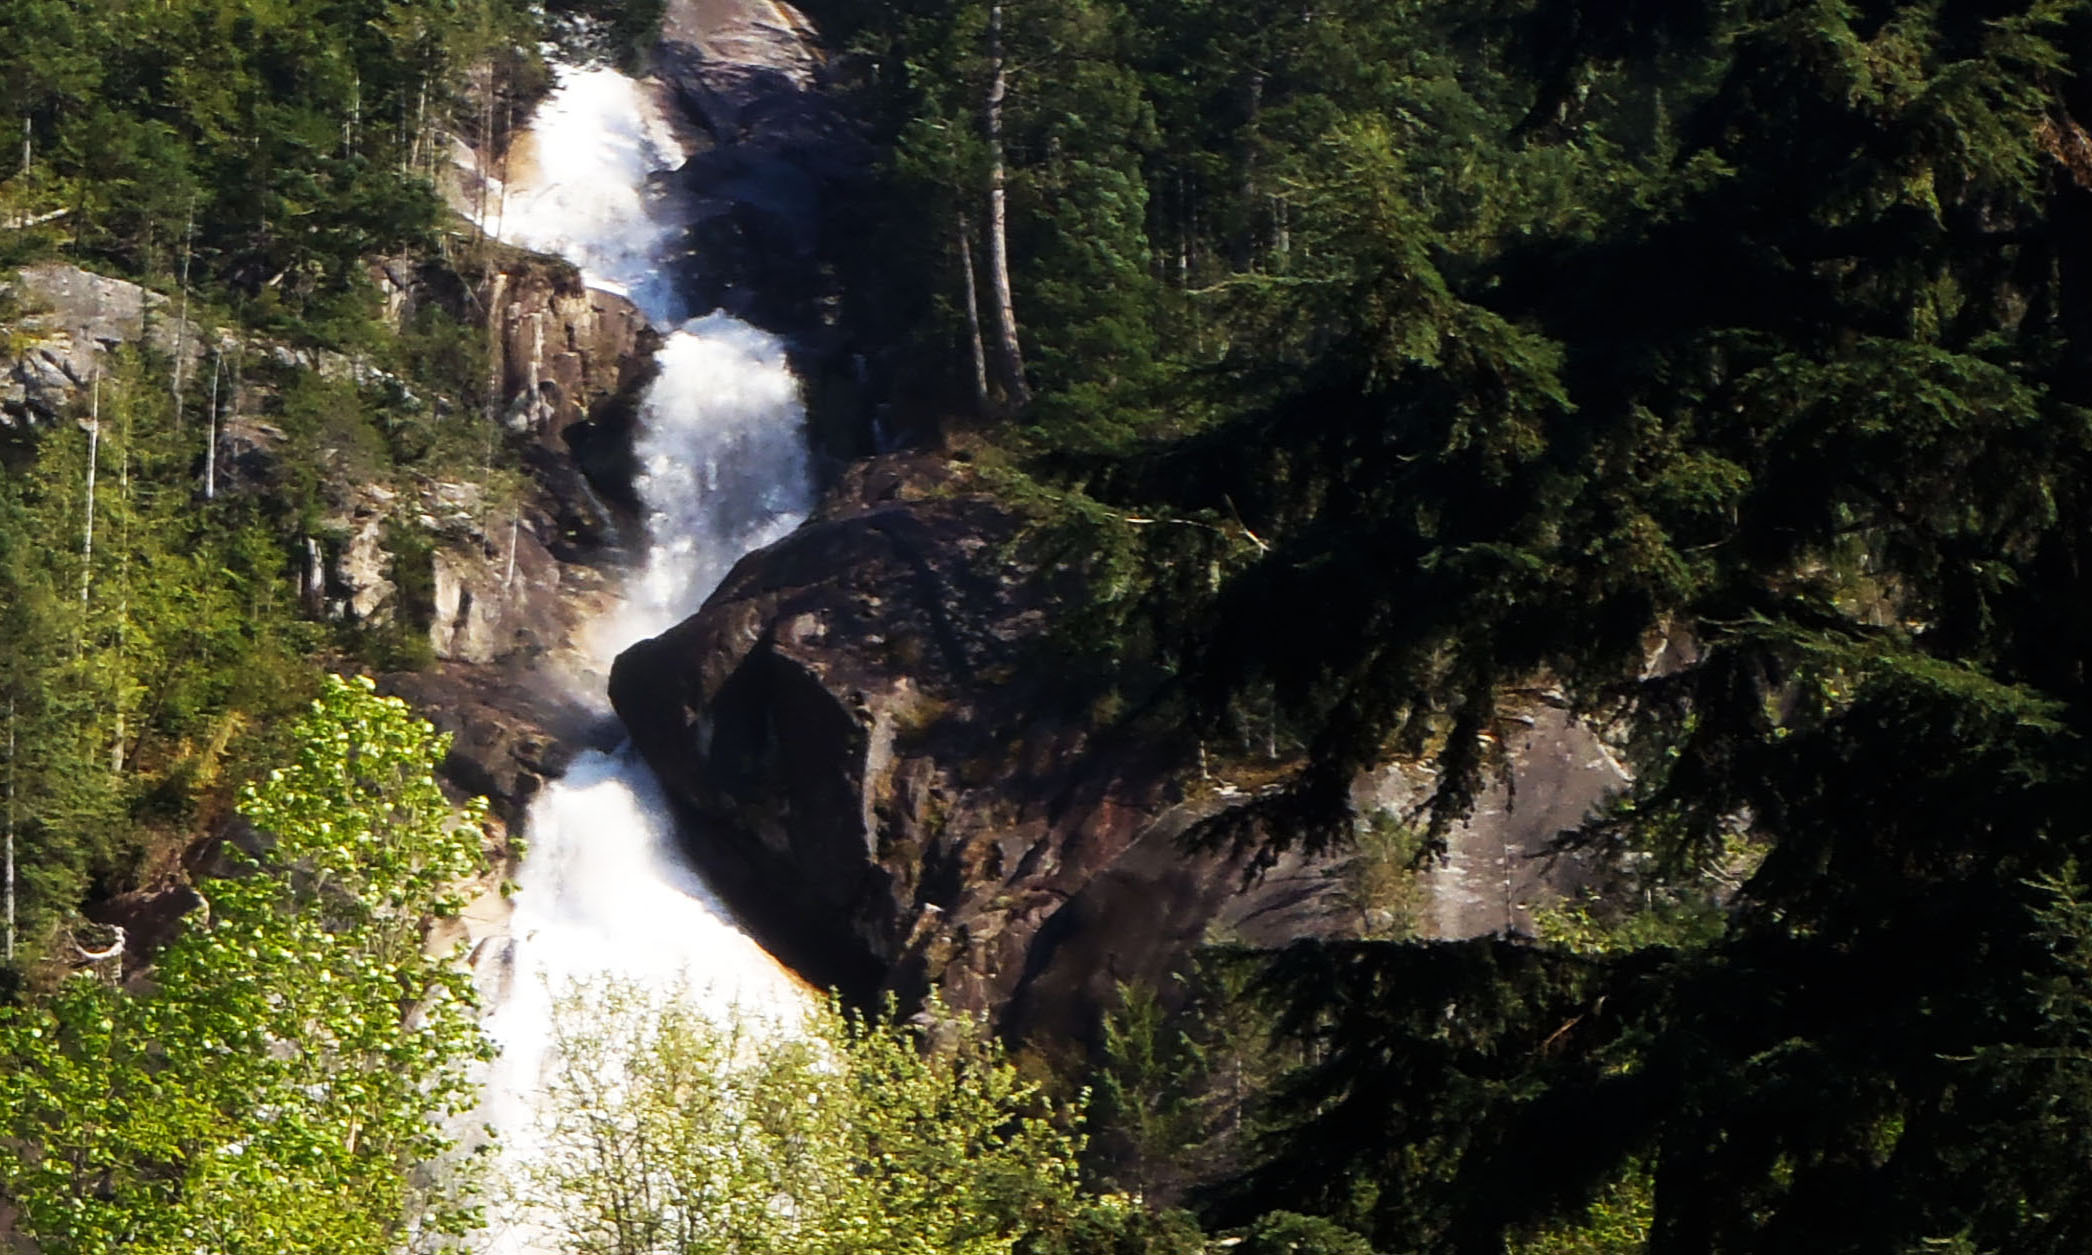 Shannon falls during a Squamish tour.